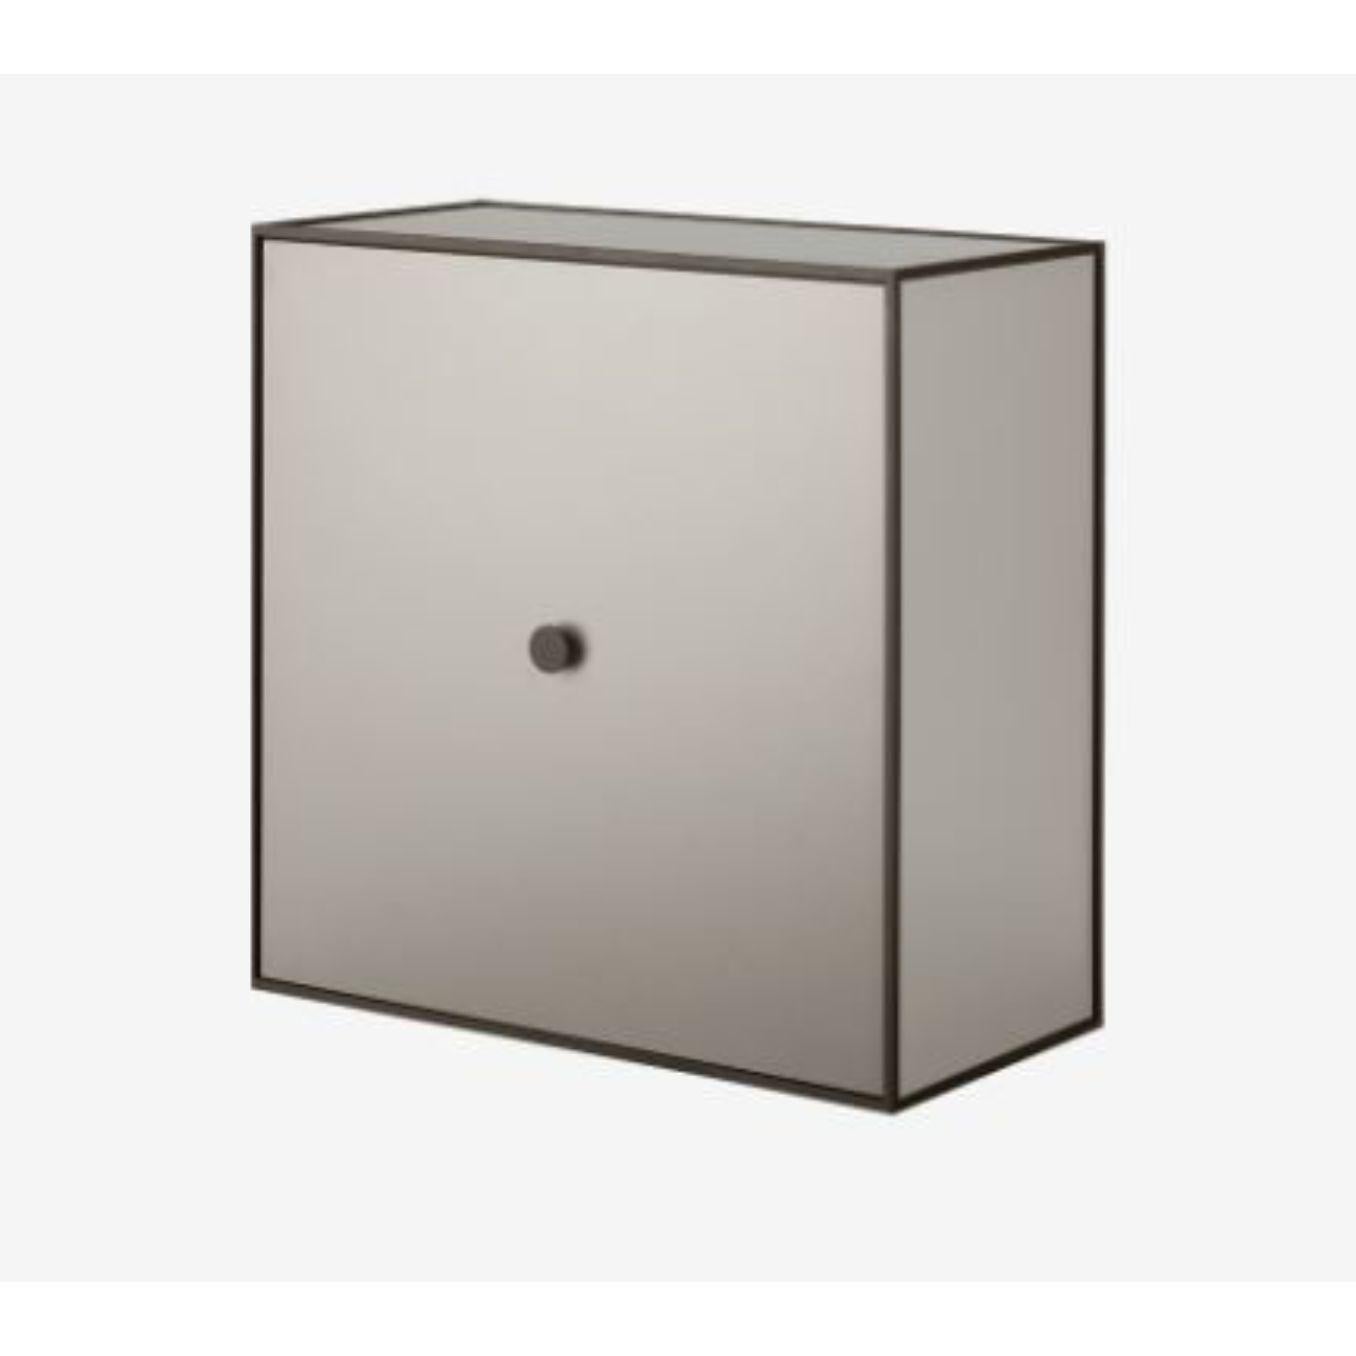 42 sand frame box with door by Lassen.
Dimensions: D 42 x W 21 x H 42 cm.
Materials: Finér, Melamin, Melamin, Melamine, metal, veneer.
Also available in different colours and dimensions.
Weight: 11.50 Kg

By Lassen is a Danish design brand